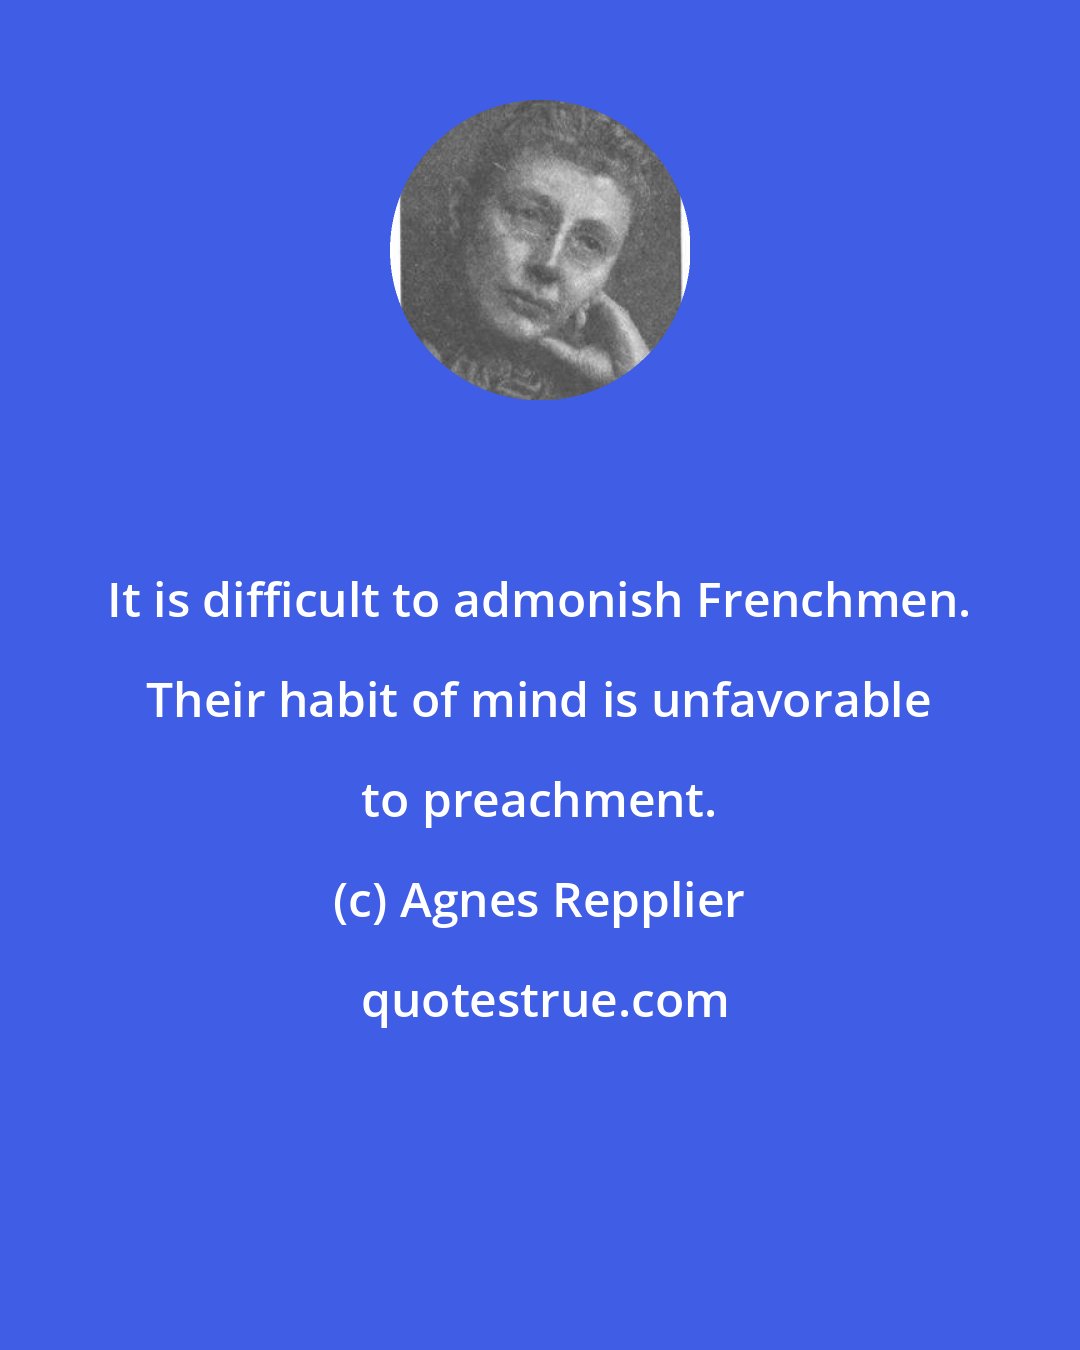 Agnes Repplier: It is difficult to admonish Frenchmen. Their habit of mind is unfavorable to preachment.